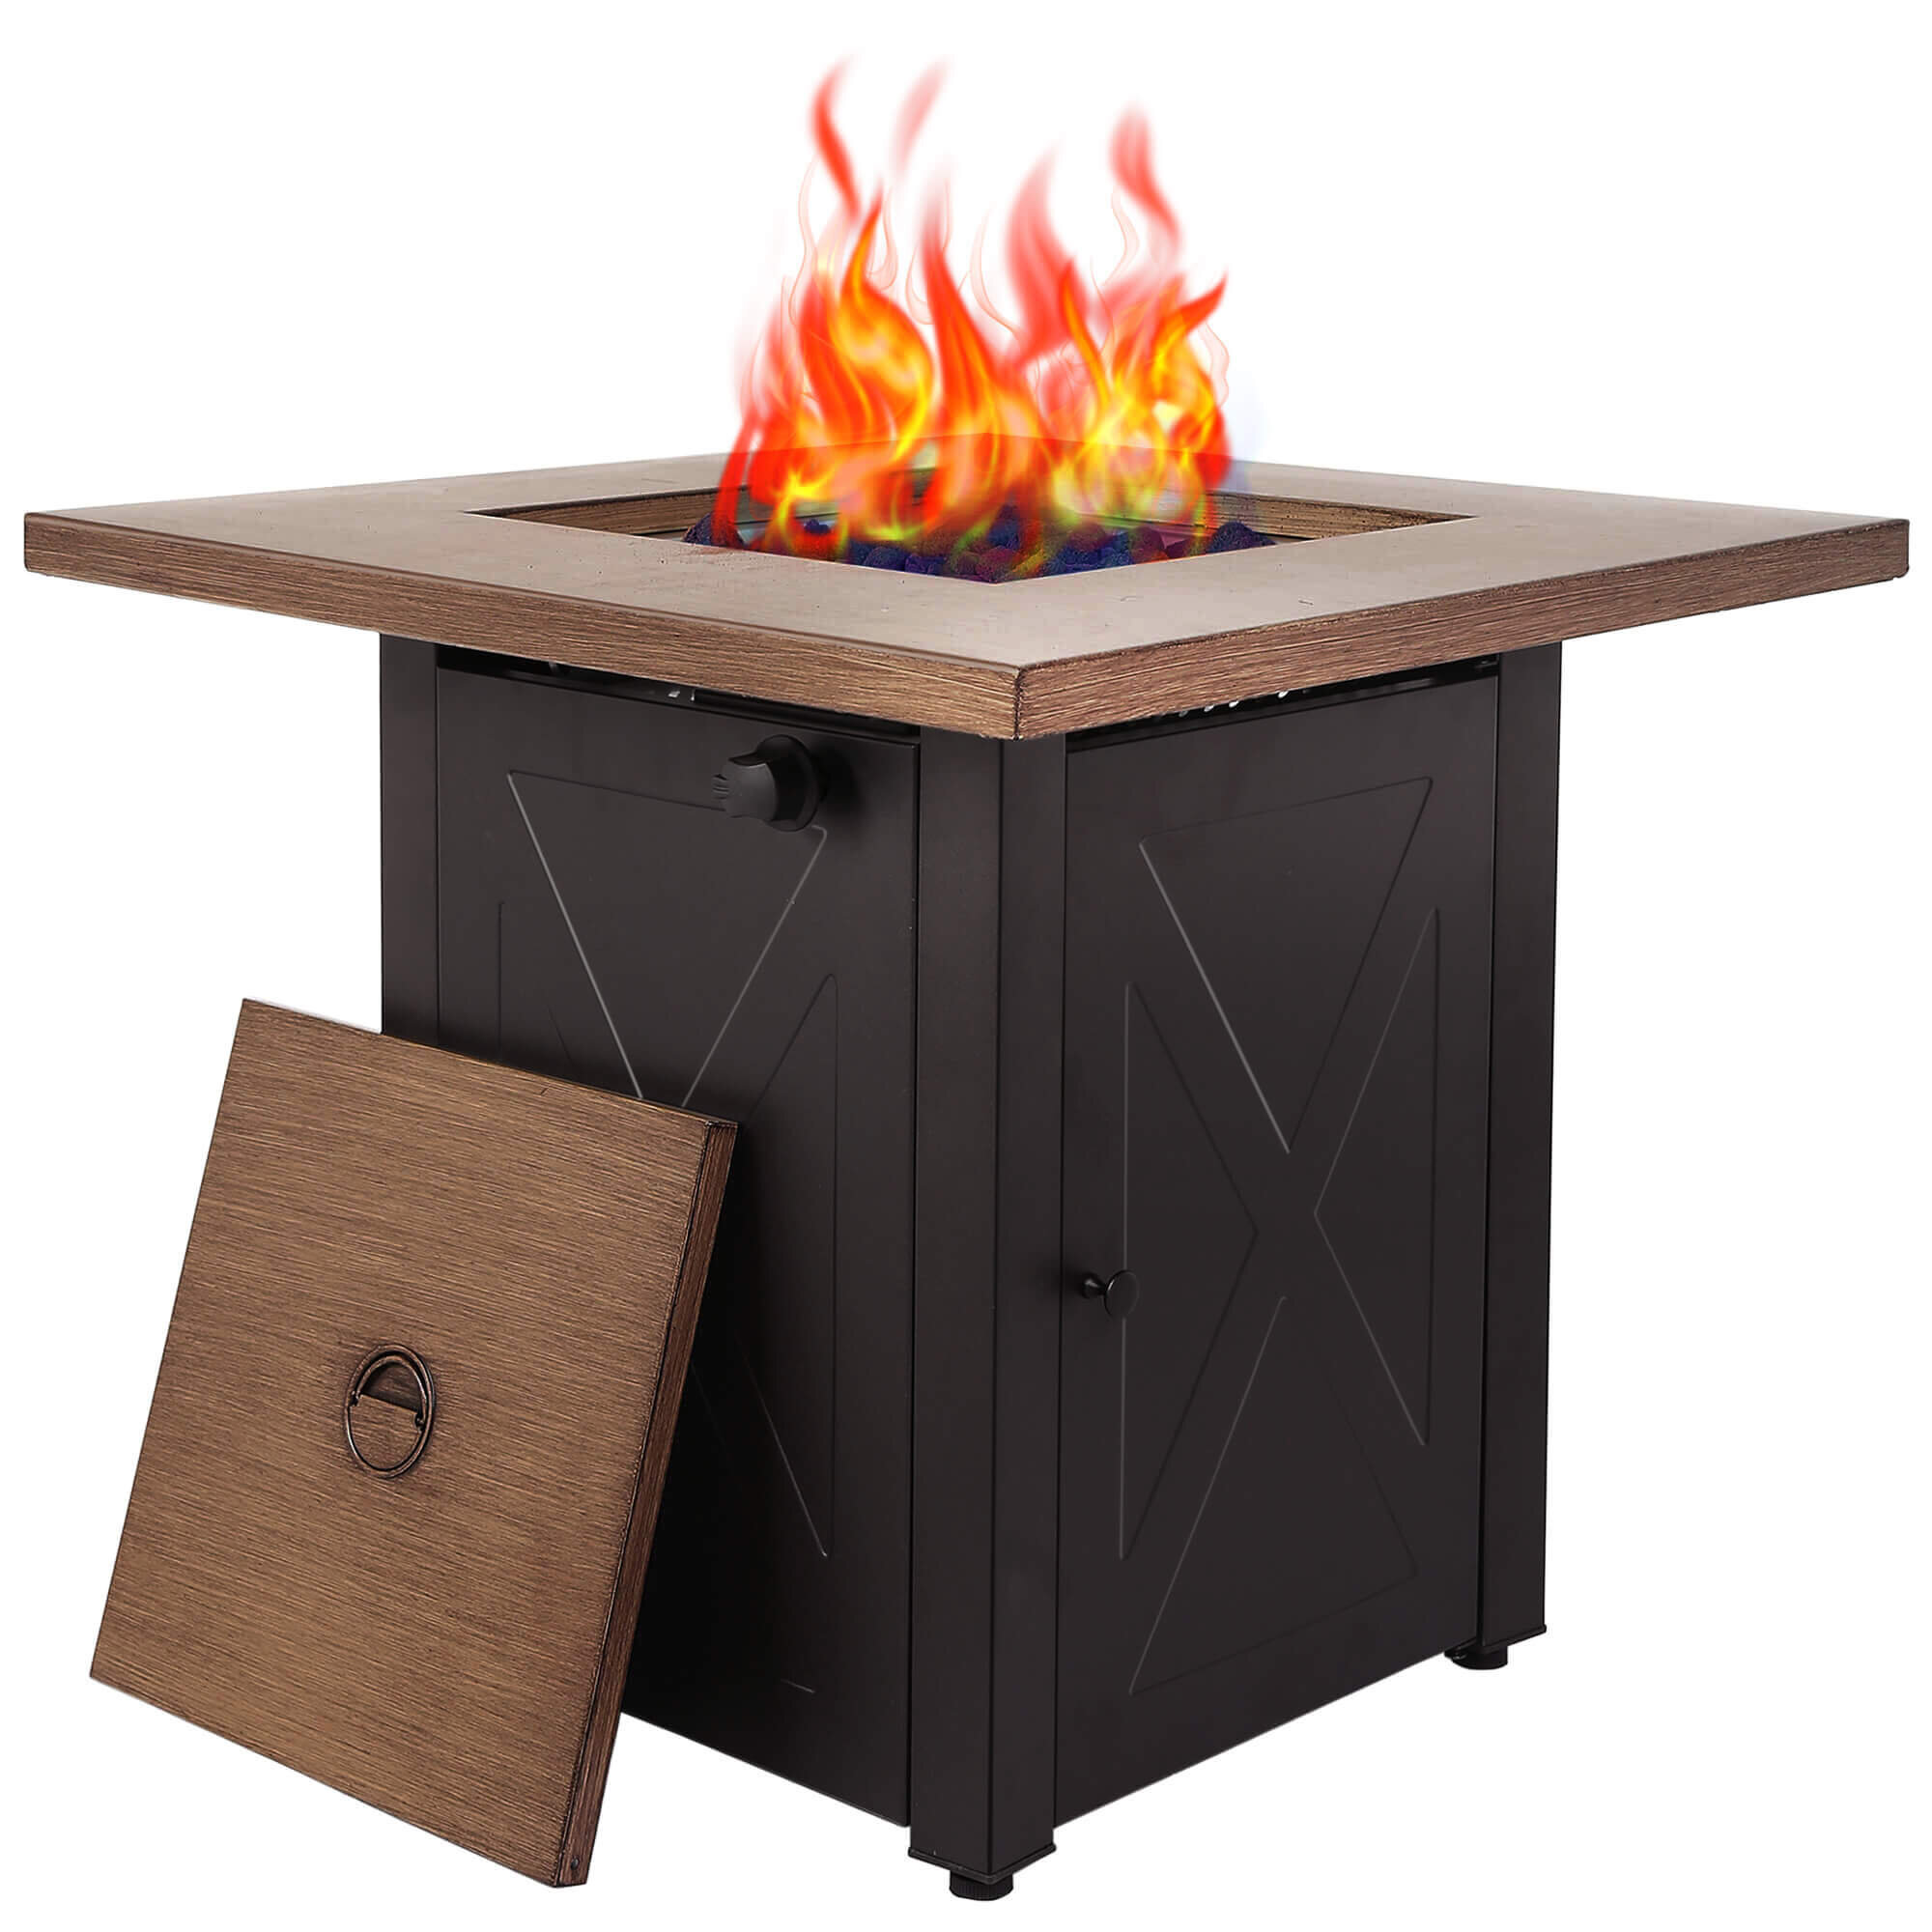 Legacy Heating Iron Propane Fire Pit Table Reviews Wayfair